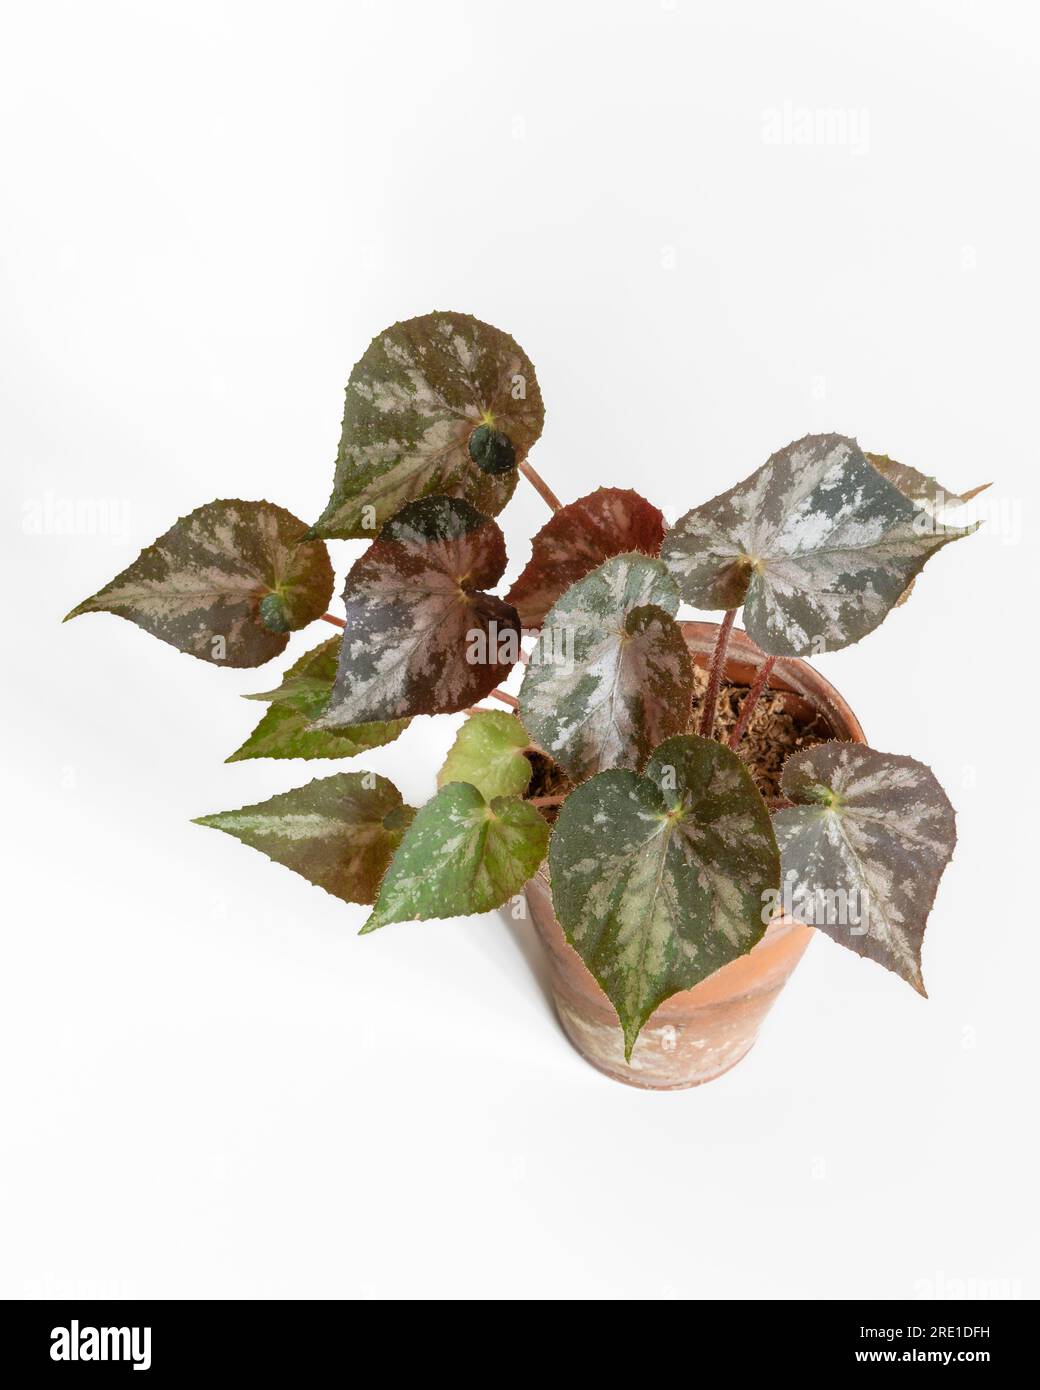 Closeup vertical top view of young rhizomatous begonia in clay pot with green, silver and dark red foliage isolated on white background Stock Photo